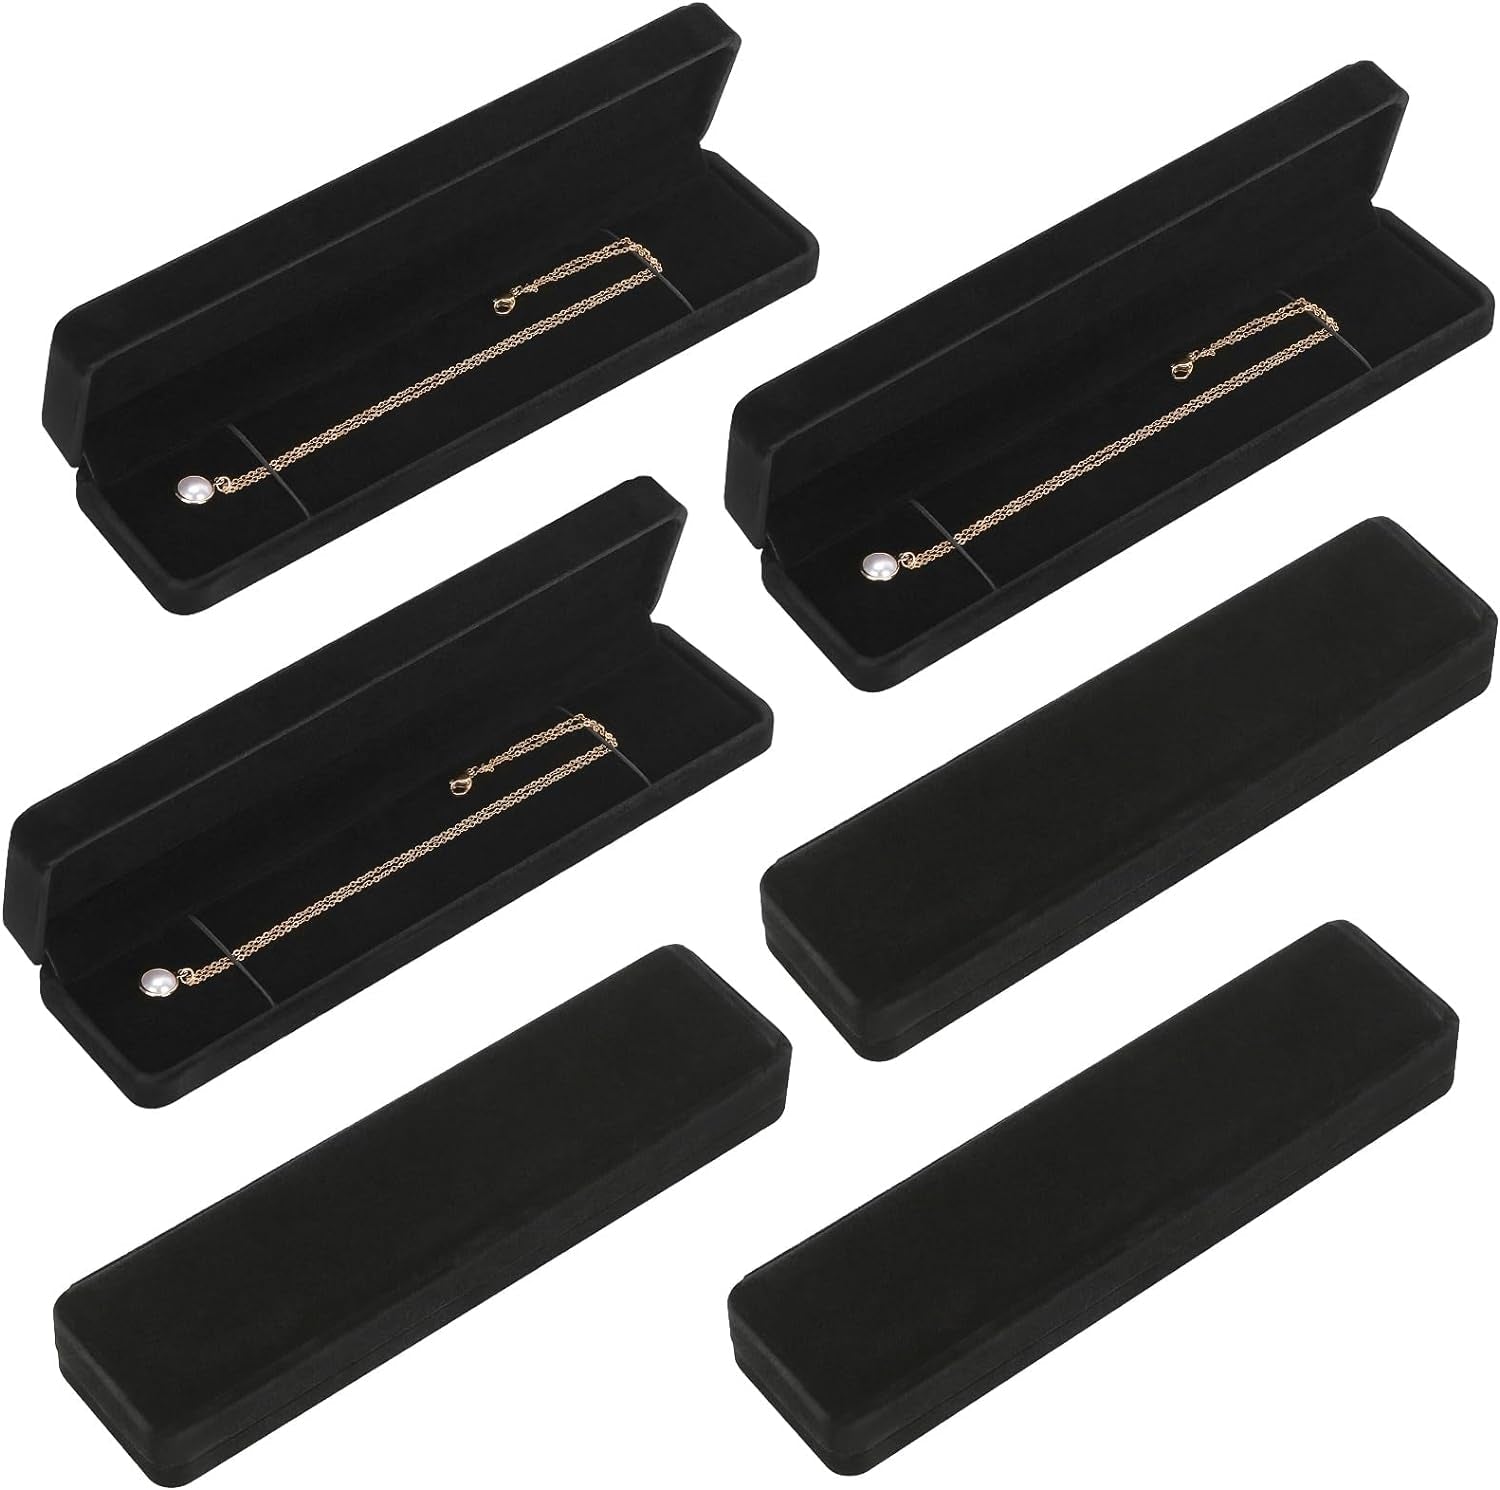 LETURE 6 Pieces Velvet Jewelry Gift Boxes for Necklace Pendant Bracelet Ring Earring, Jewelry Storage Display Case for Christmas Wedding Engagement Birthday Anniversary (Pendant Box STYLE-6PCS)